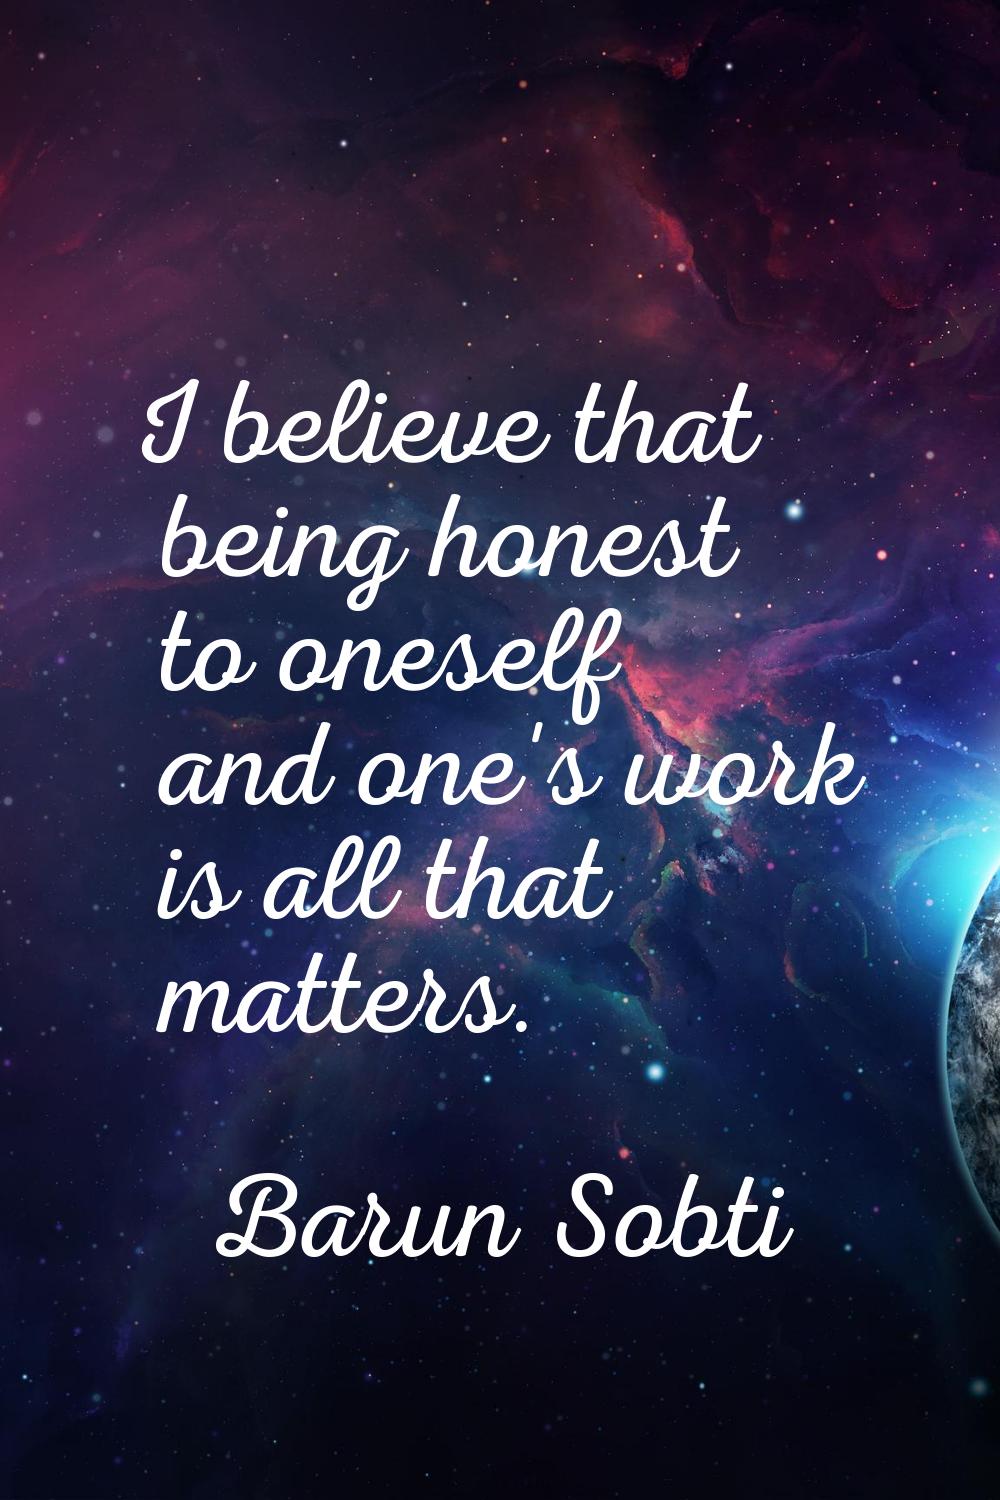 I believe that being honest to oneself and one's work is all that matters.